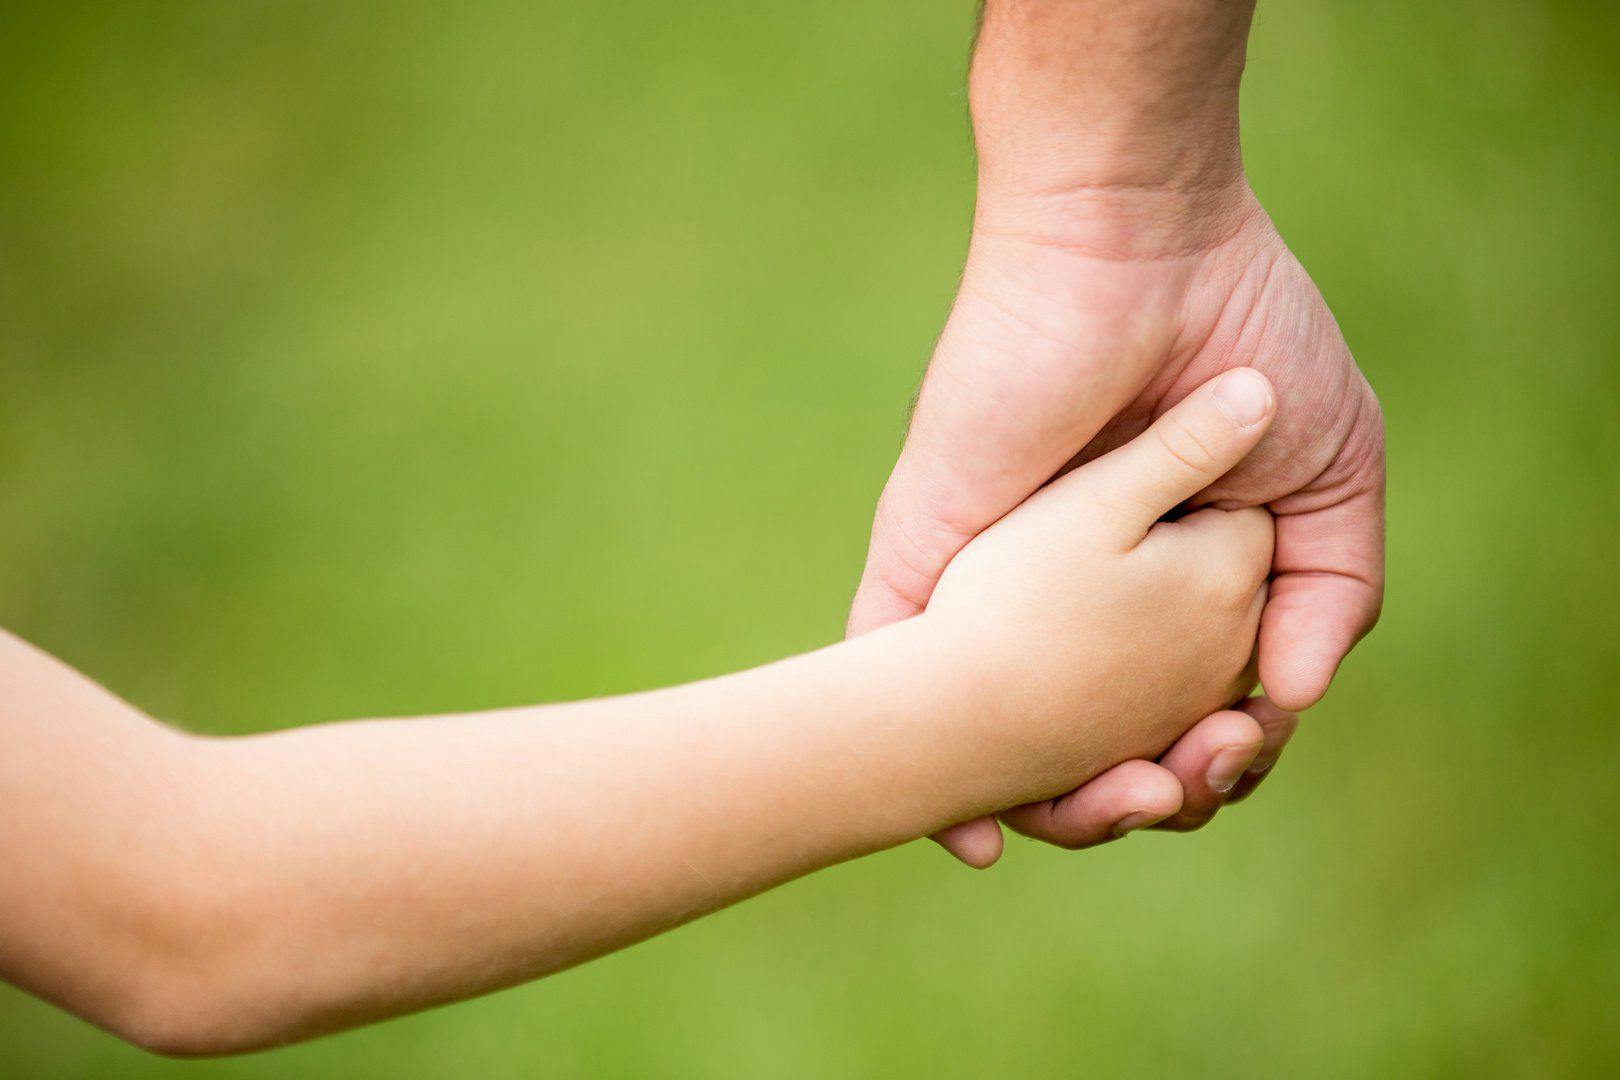 Attachment is the key to parent-child relationships